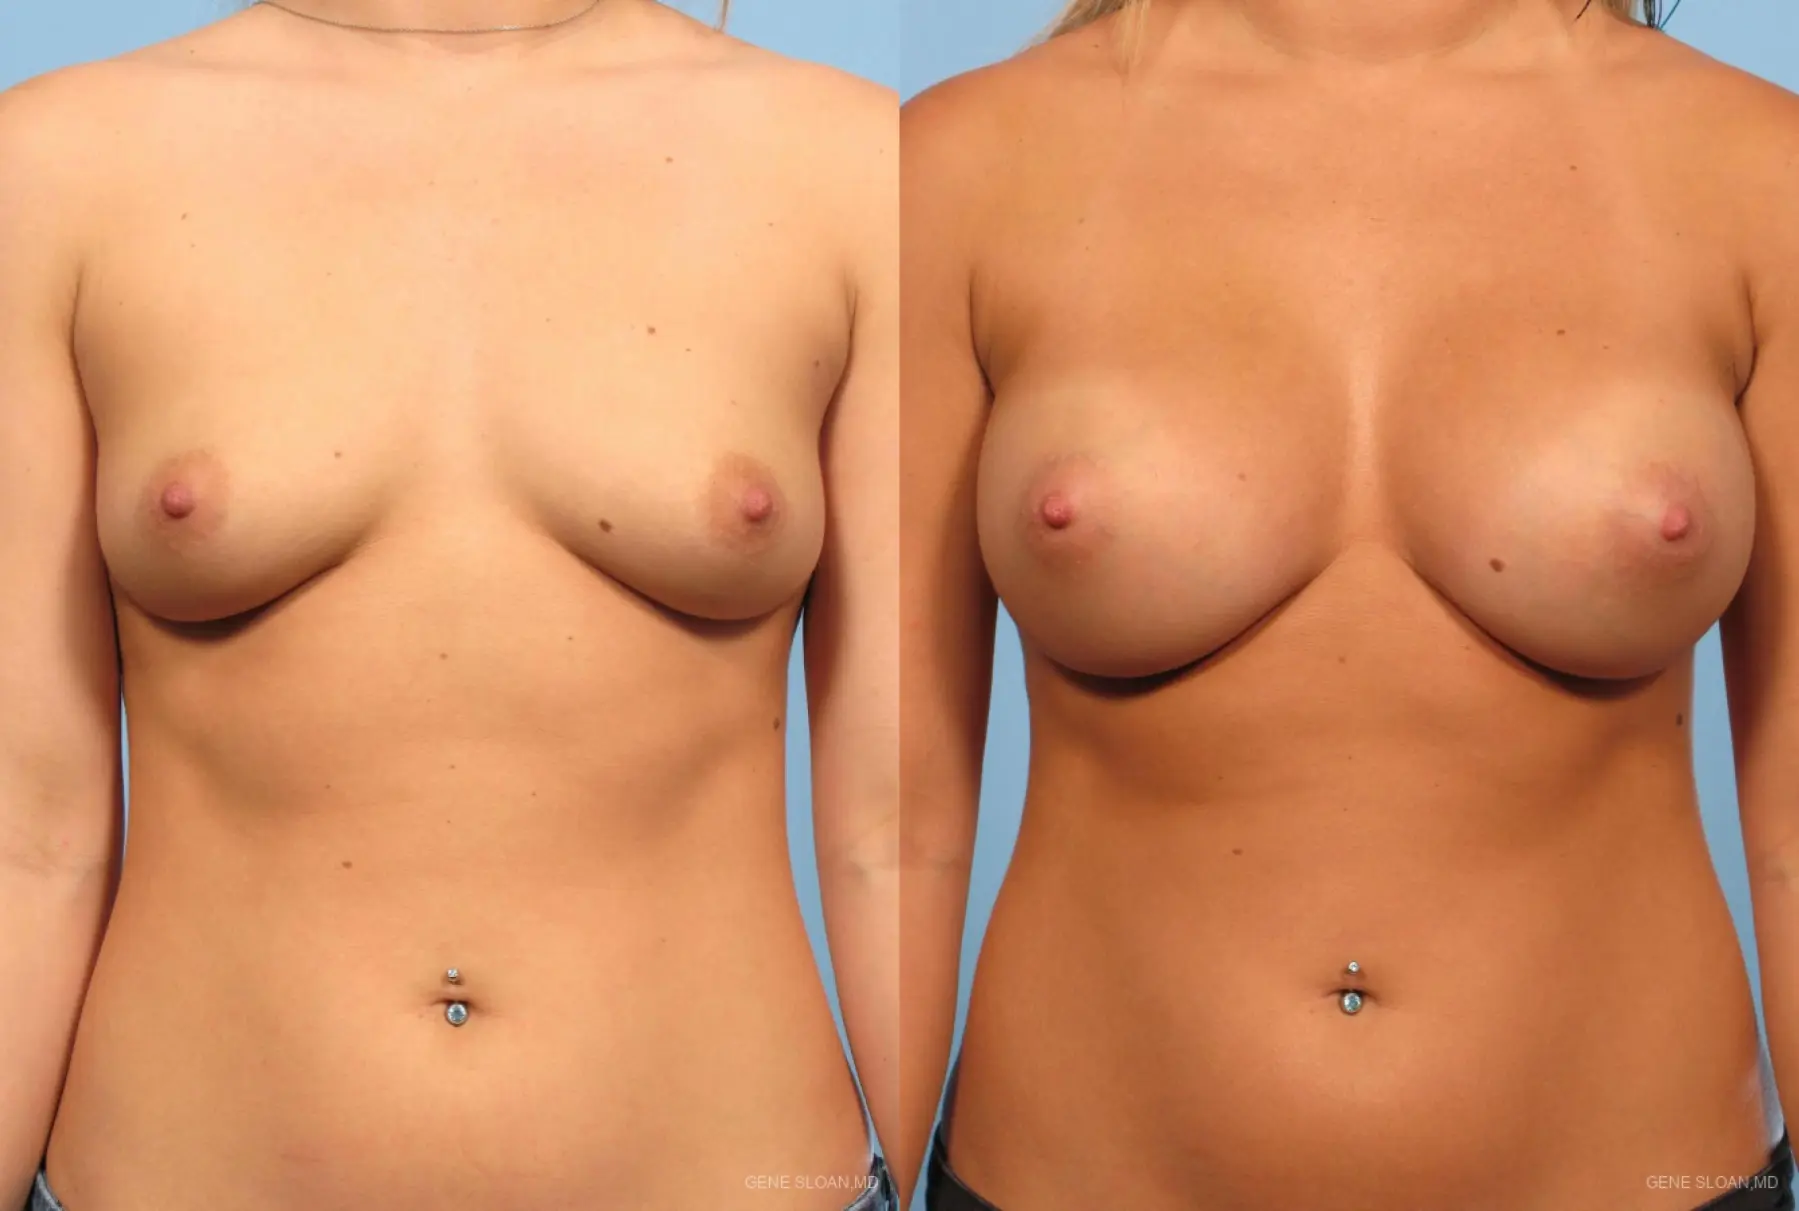 Breast Augmentation: Patient 3 - Before and After 1